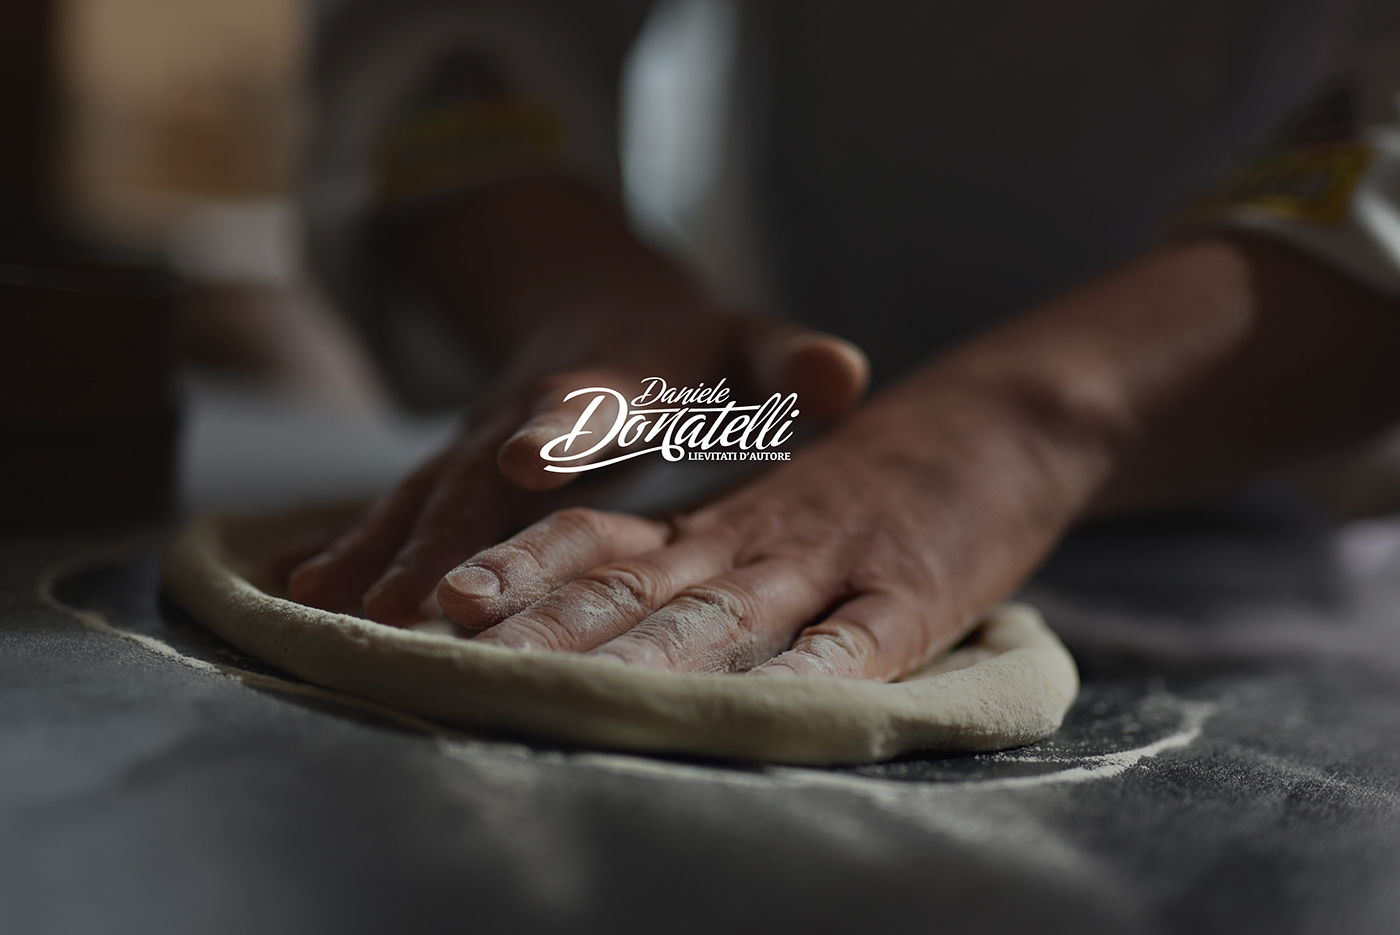 Pizza gourmet site design UI/UX user experience Italy Food 